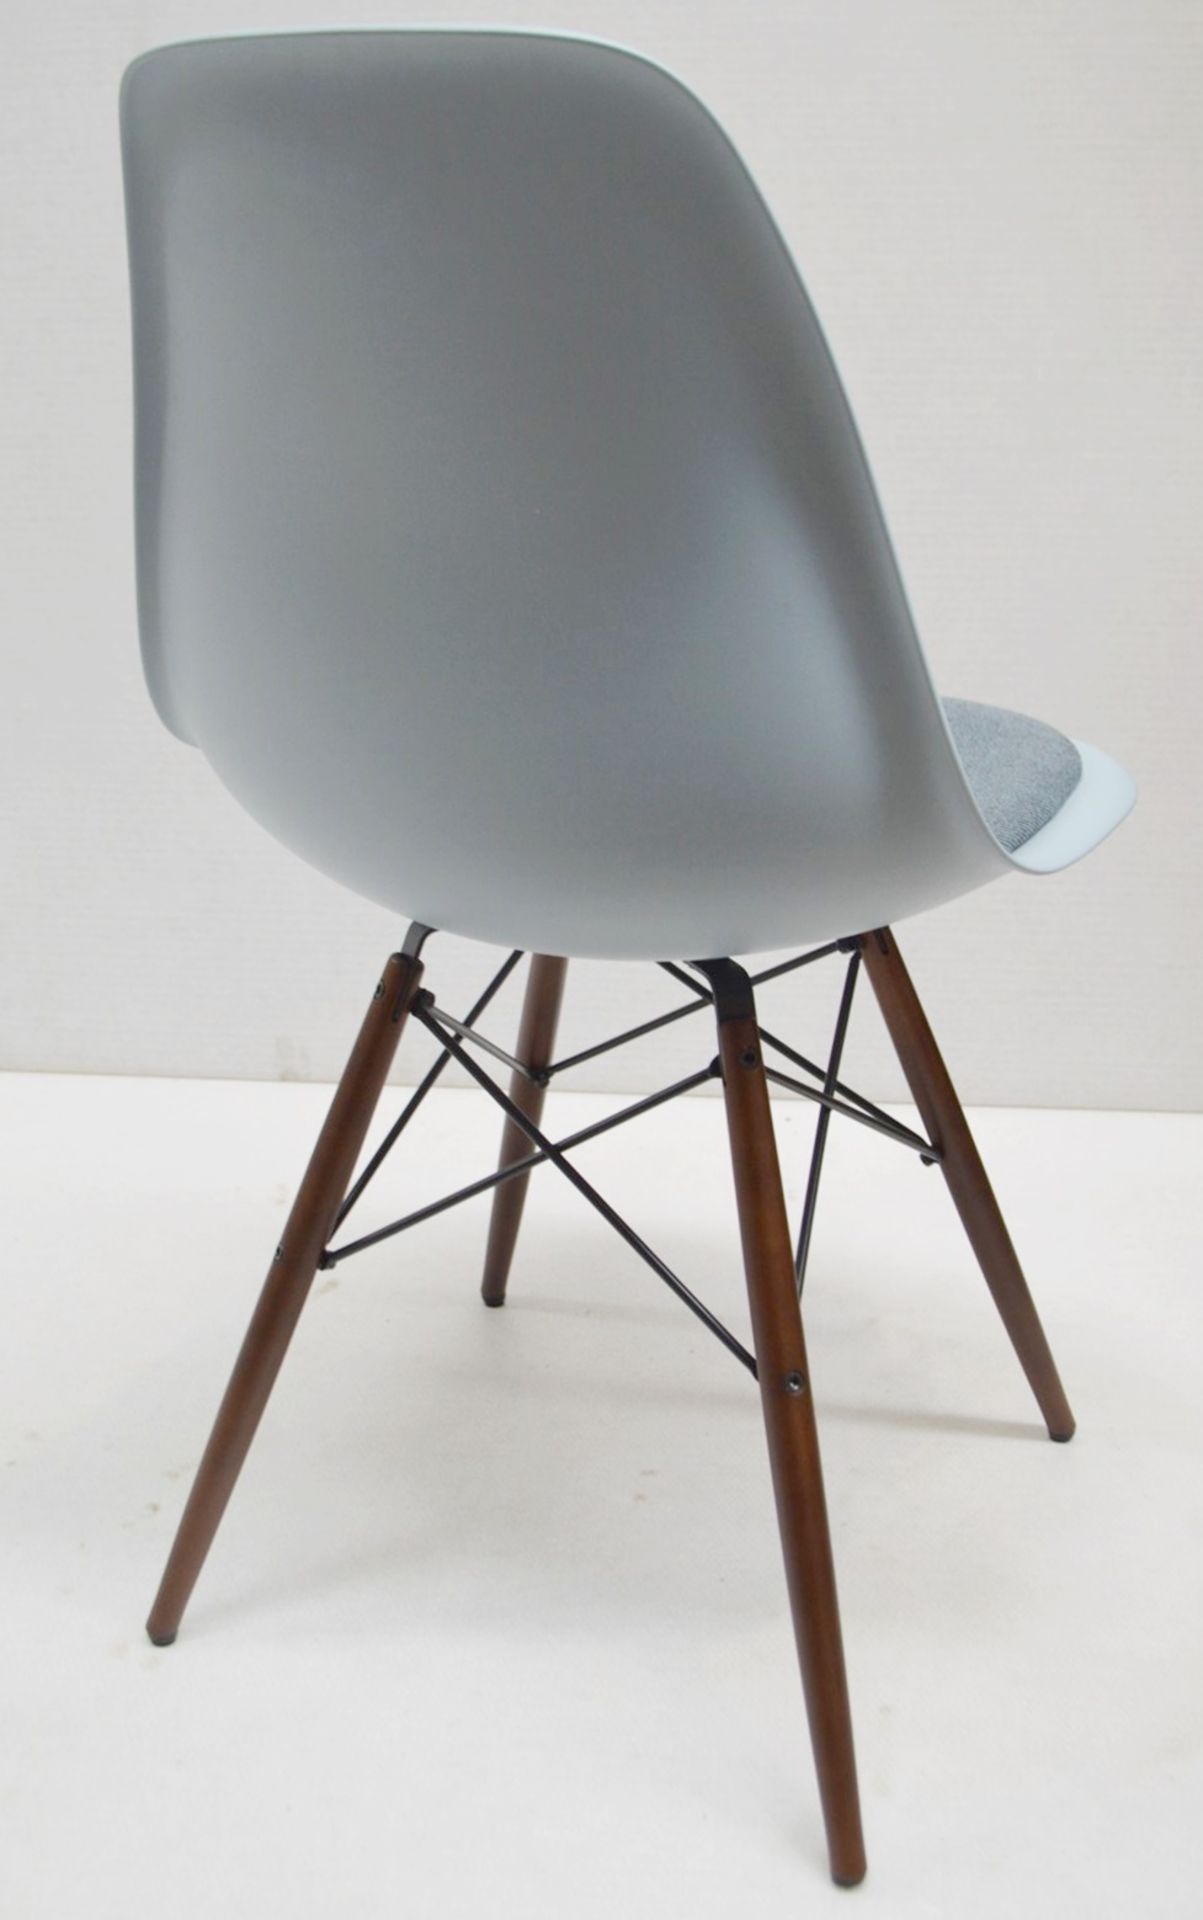 1 x VITRA Eames DSW Designer Chair With Upholsted Seat And Maple Base In A Dark Stain - Image 8 of 9